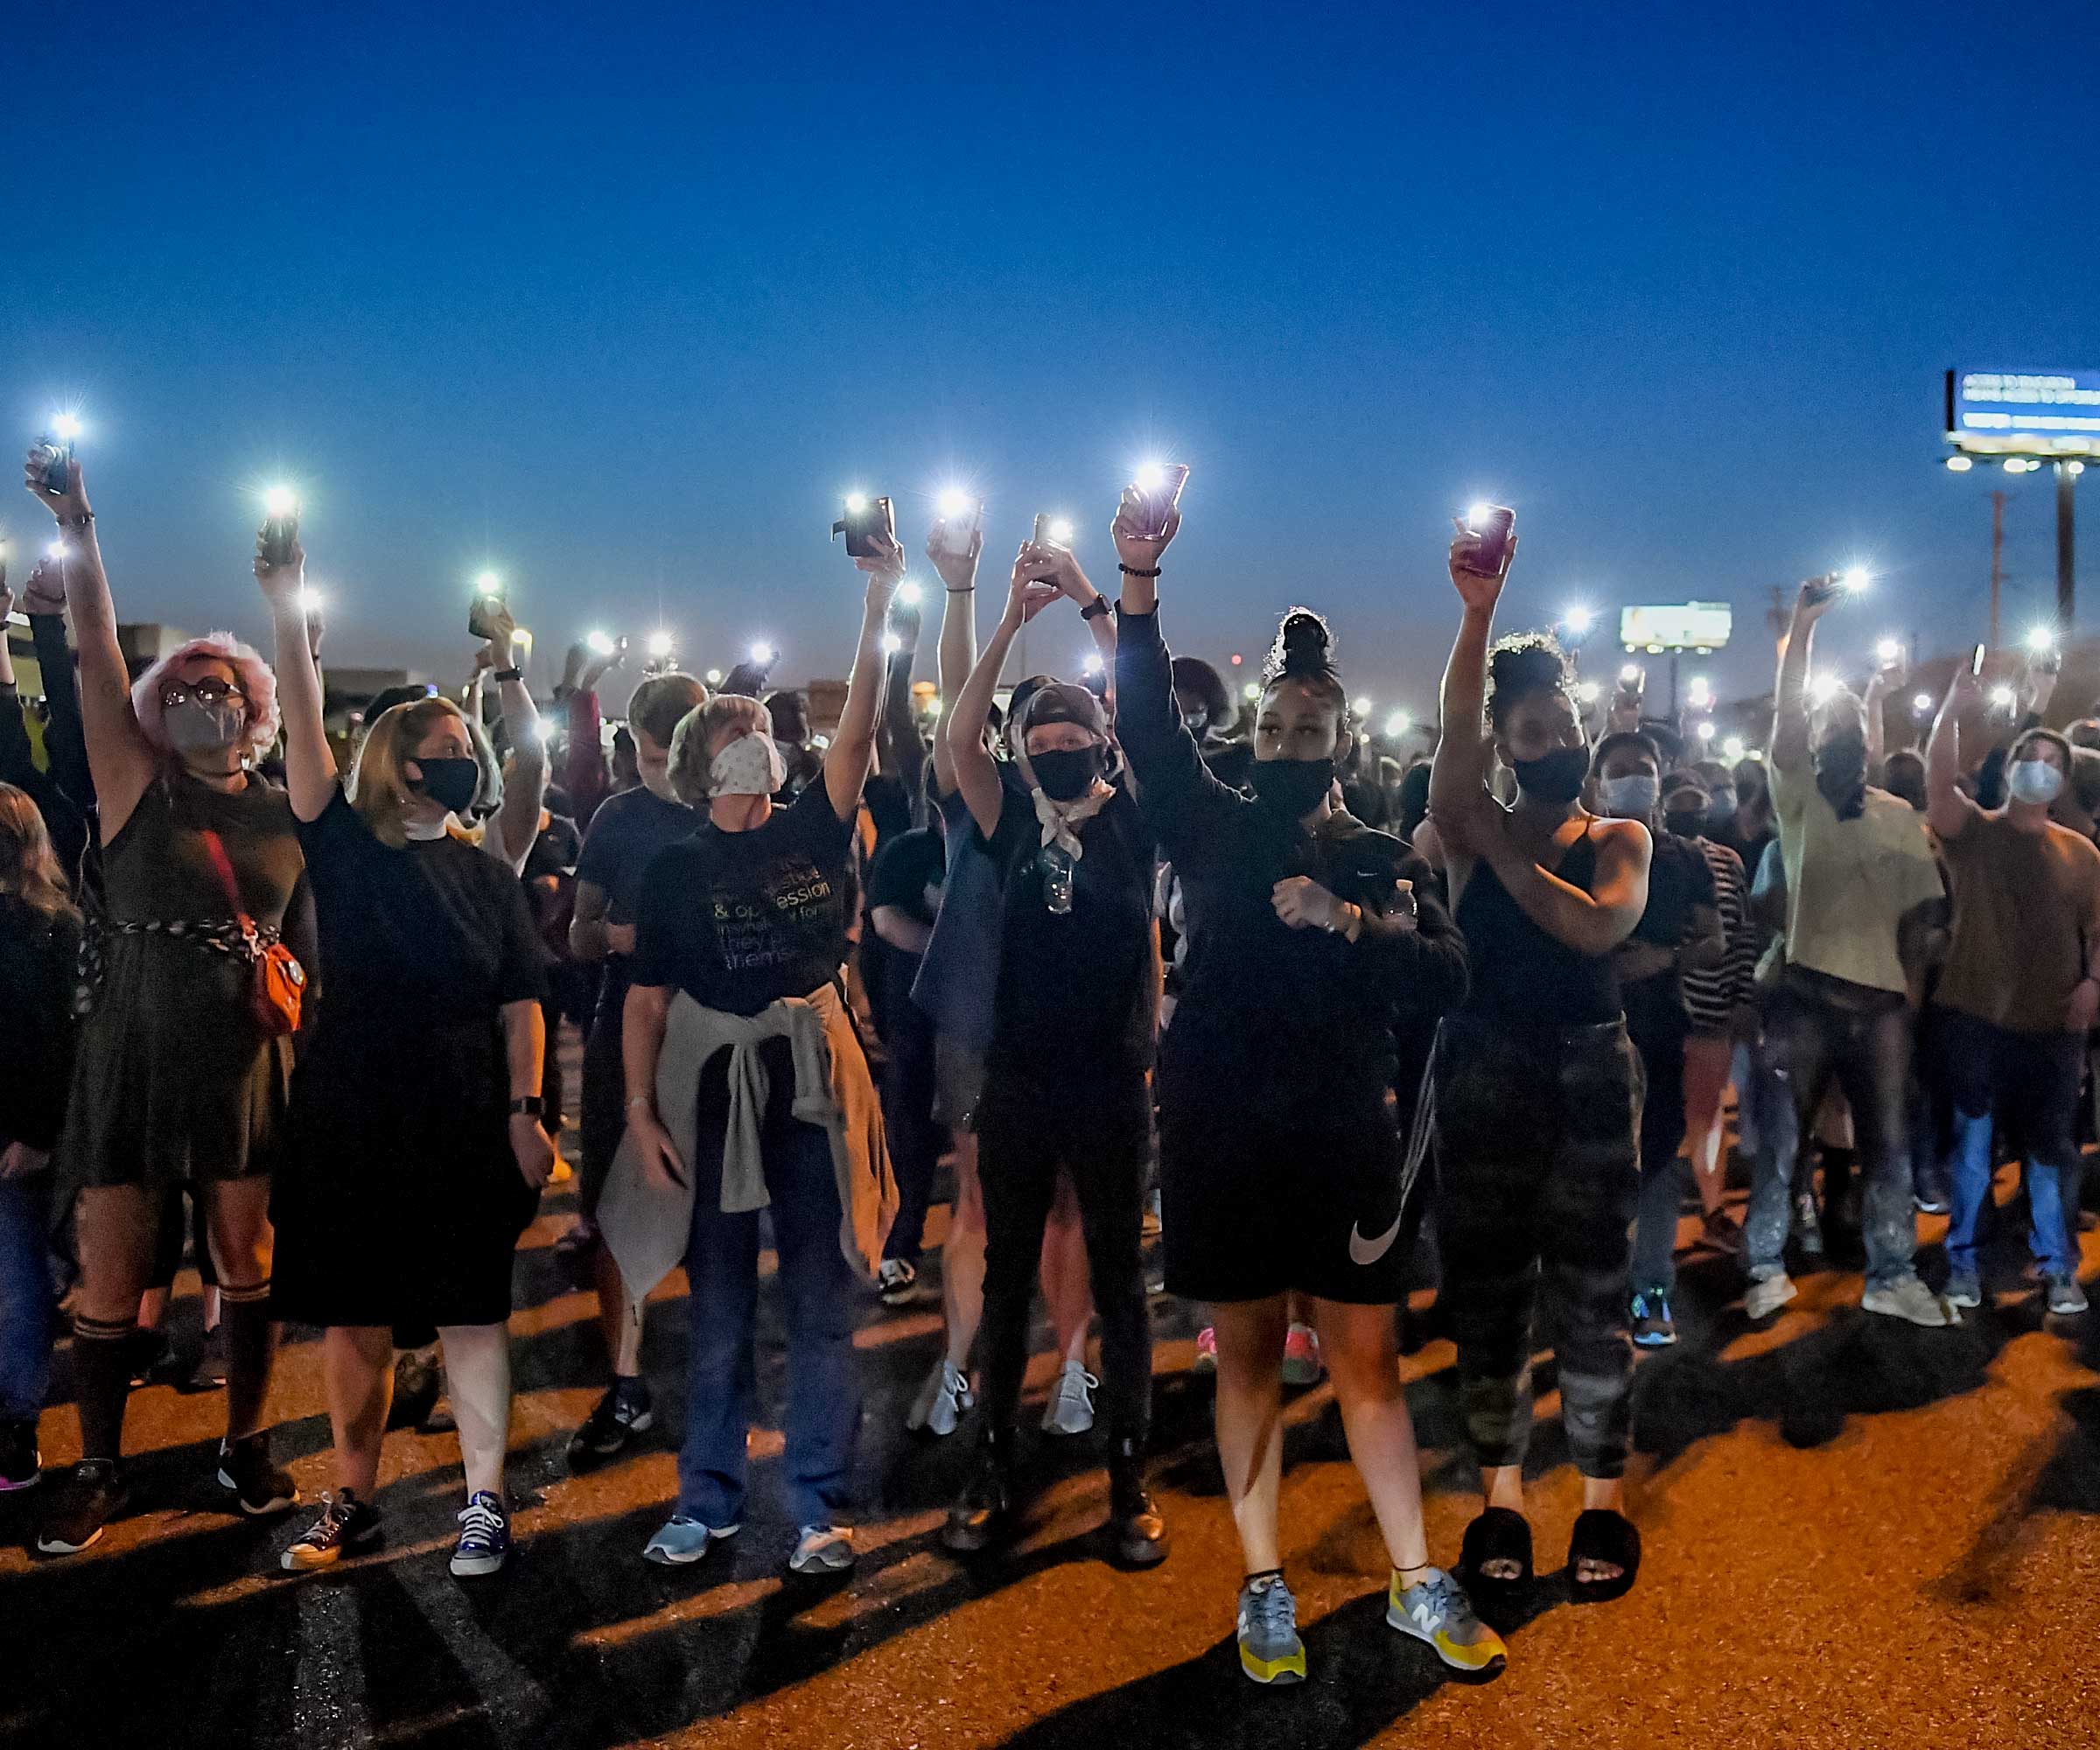 Protesters light up their cell phones on September 24, 2020 in St Louis, Missouri, at a demonstration after a grand jury's decision related to charges in the death of Breonna Taylor. © Michael B. Thomas/Getty Images News